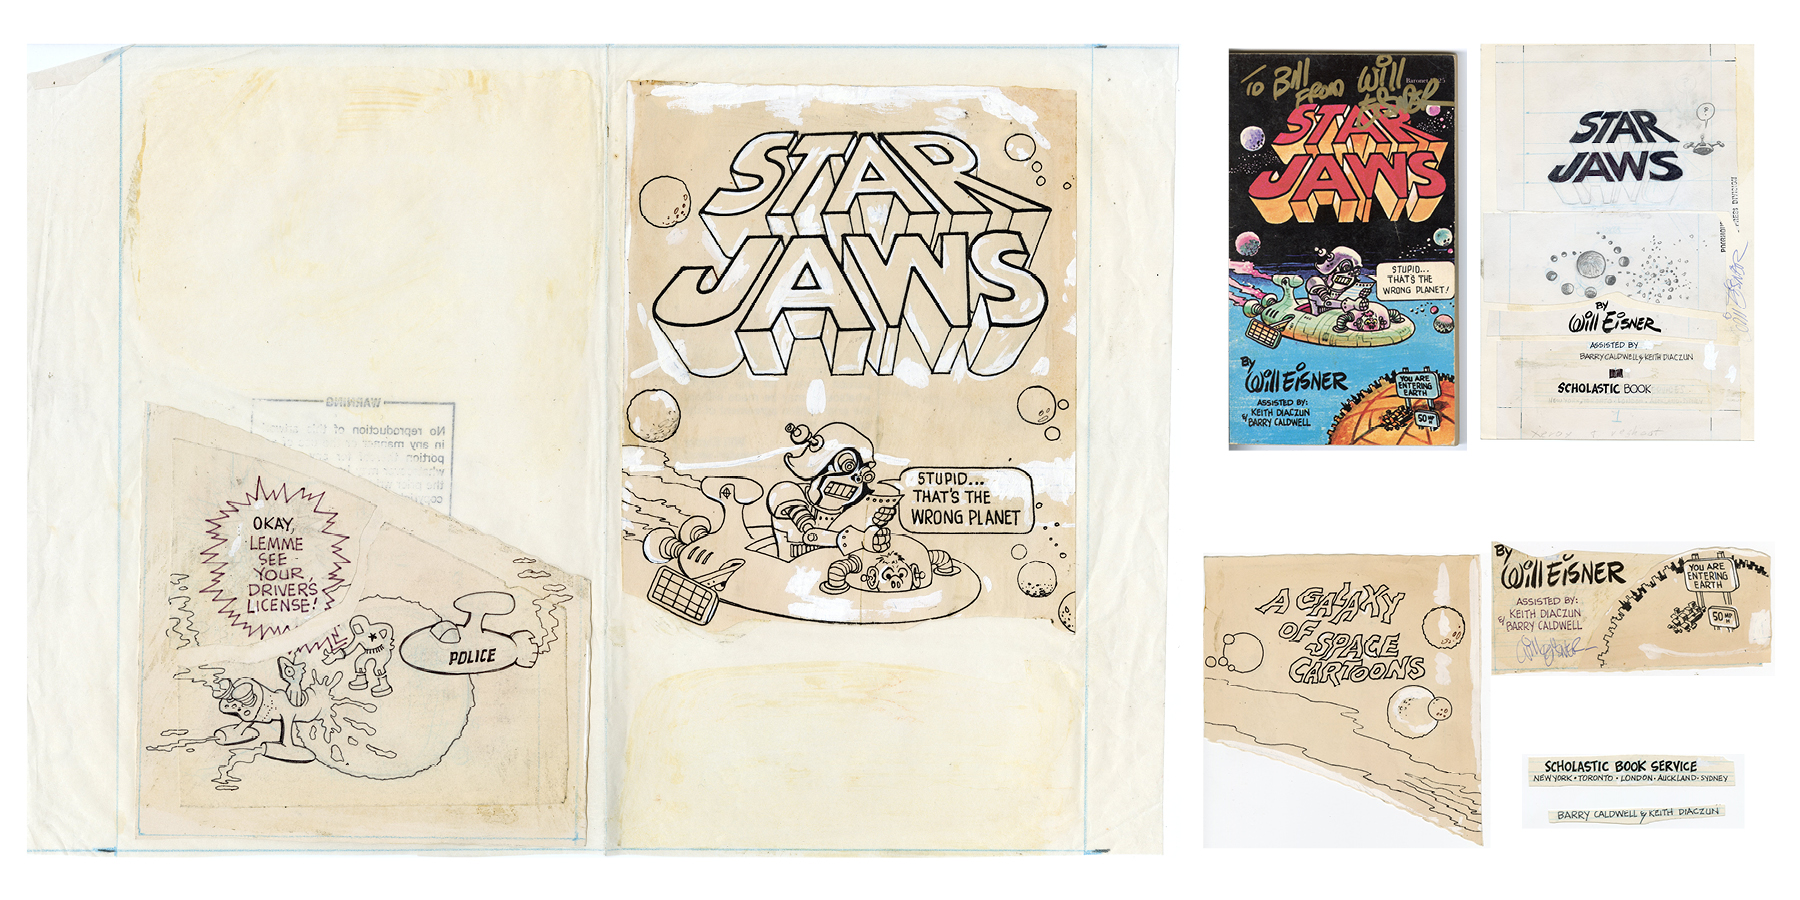 STAR JAWS (1978) - William Plumb Collection: Pair of Hand-Drawn Will Eisner Cover Artworks with Auto